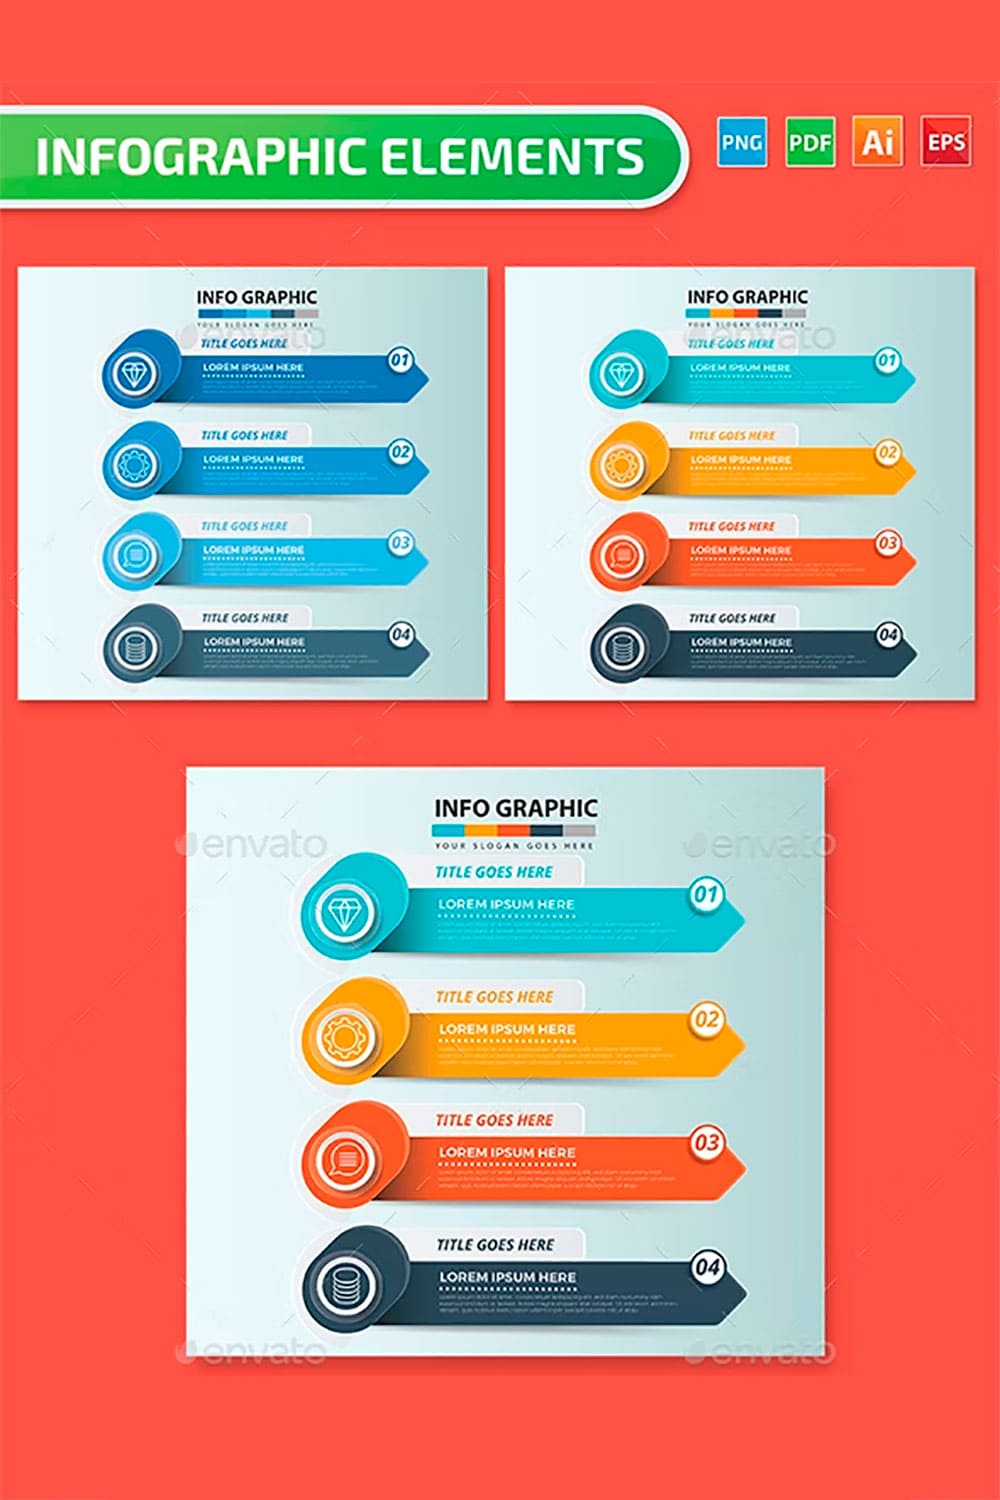 Infographics design, picture for pinterest.